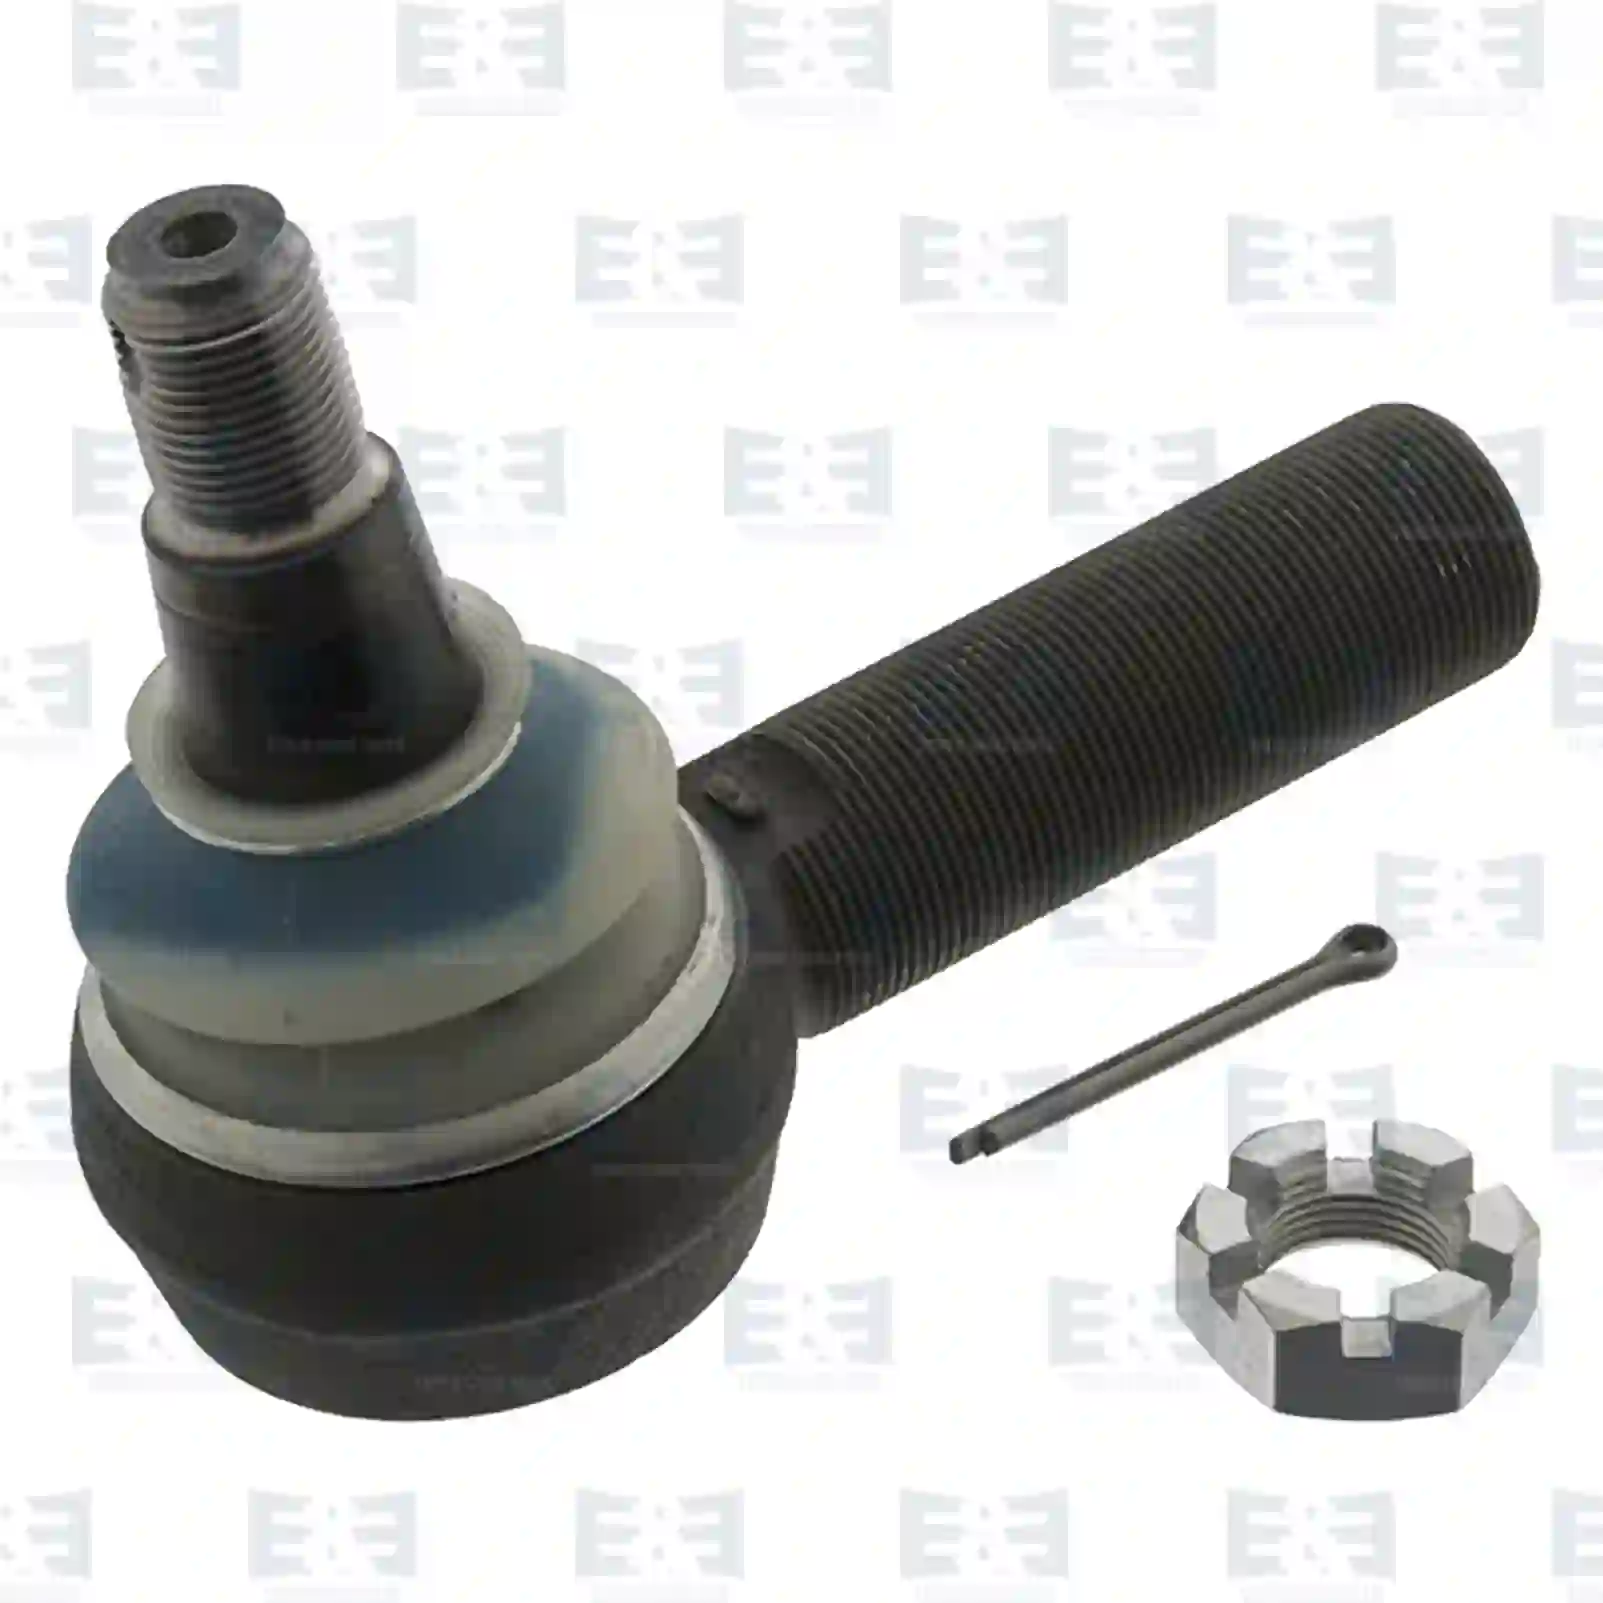 Drag Link Ball joint, right hand thread, EE No 2E2205967 ,  oem no:1505759, 1507823, 1698532, 1698846, 3090727, 3092472, 3092473, 3110002, 366758, 3988965, 6884002, 6889479, 70371282, 85114148, ZG40368-0008 E&E Truck Spare Parts | Truck Spare Parts, Auotomotive Spare Parts